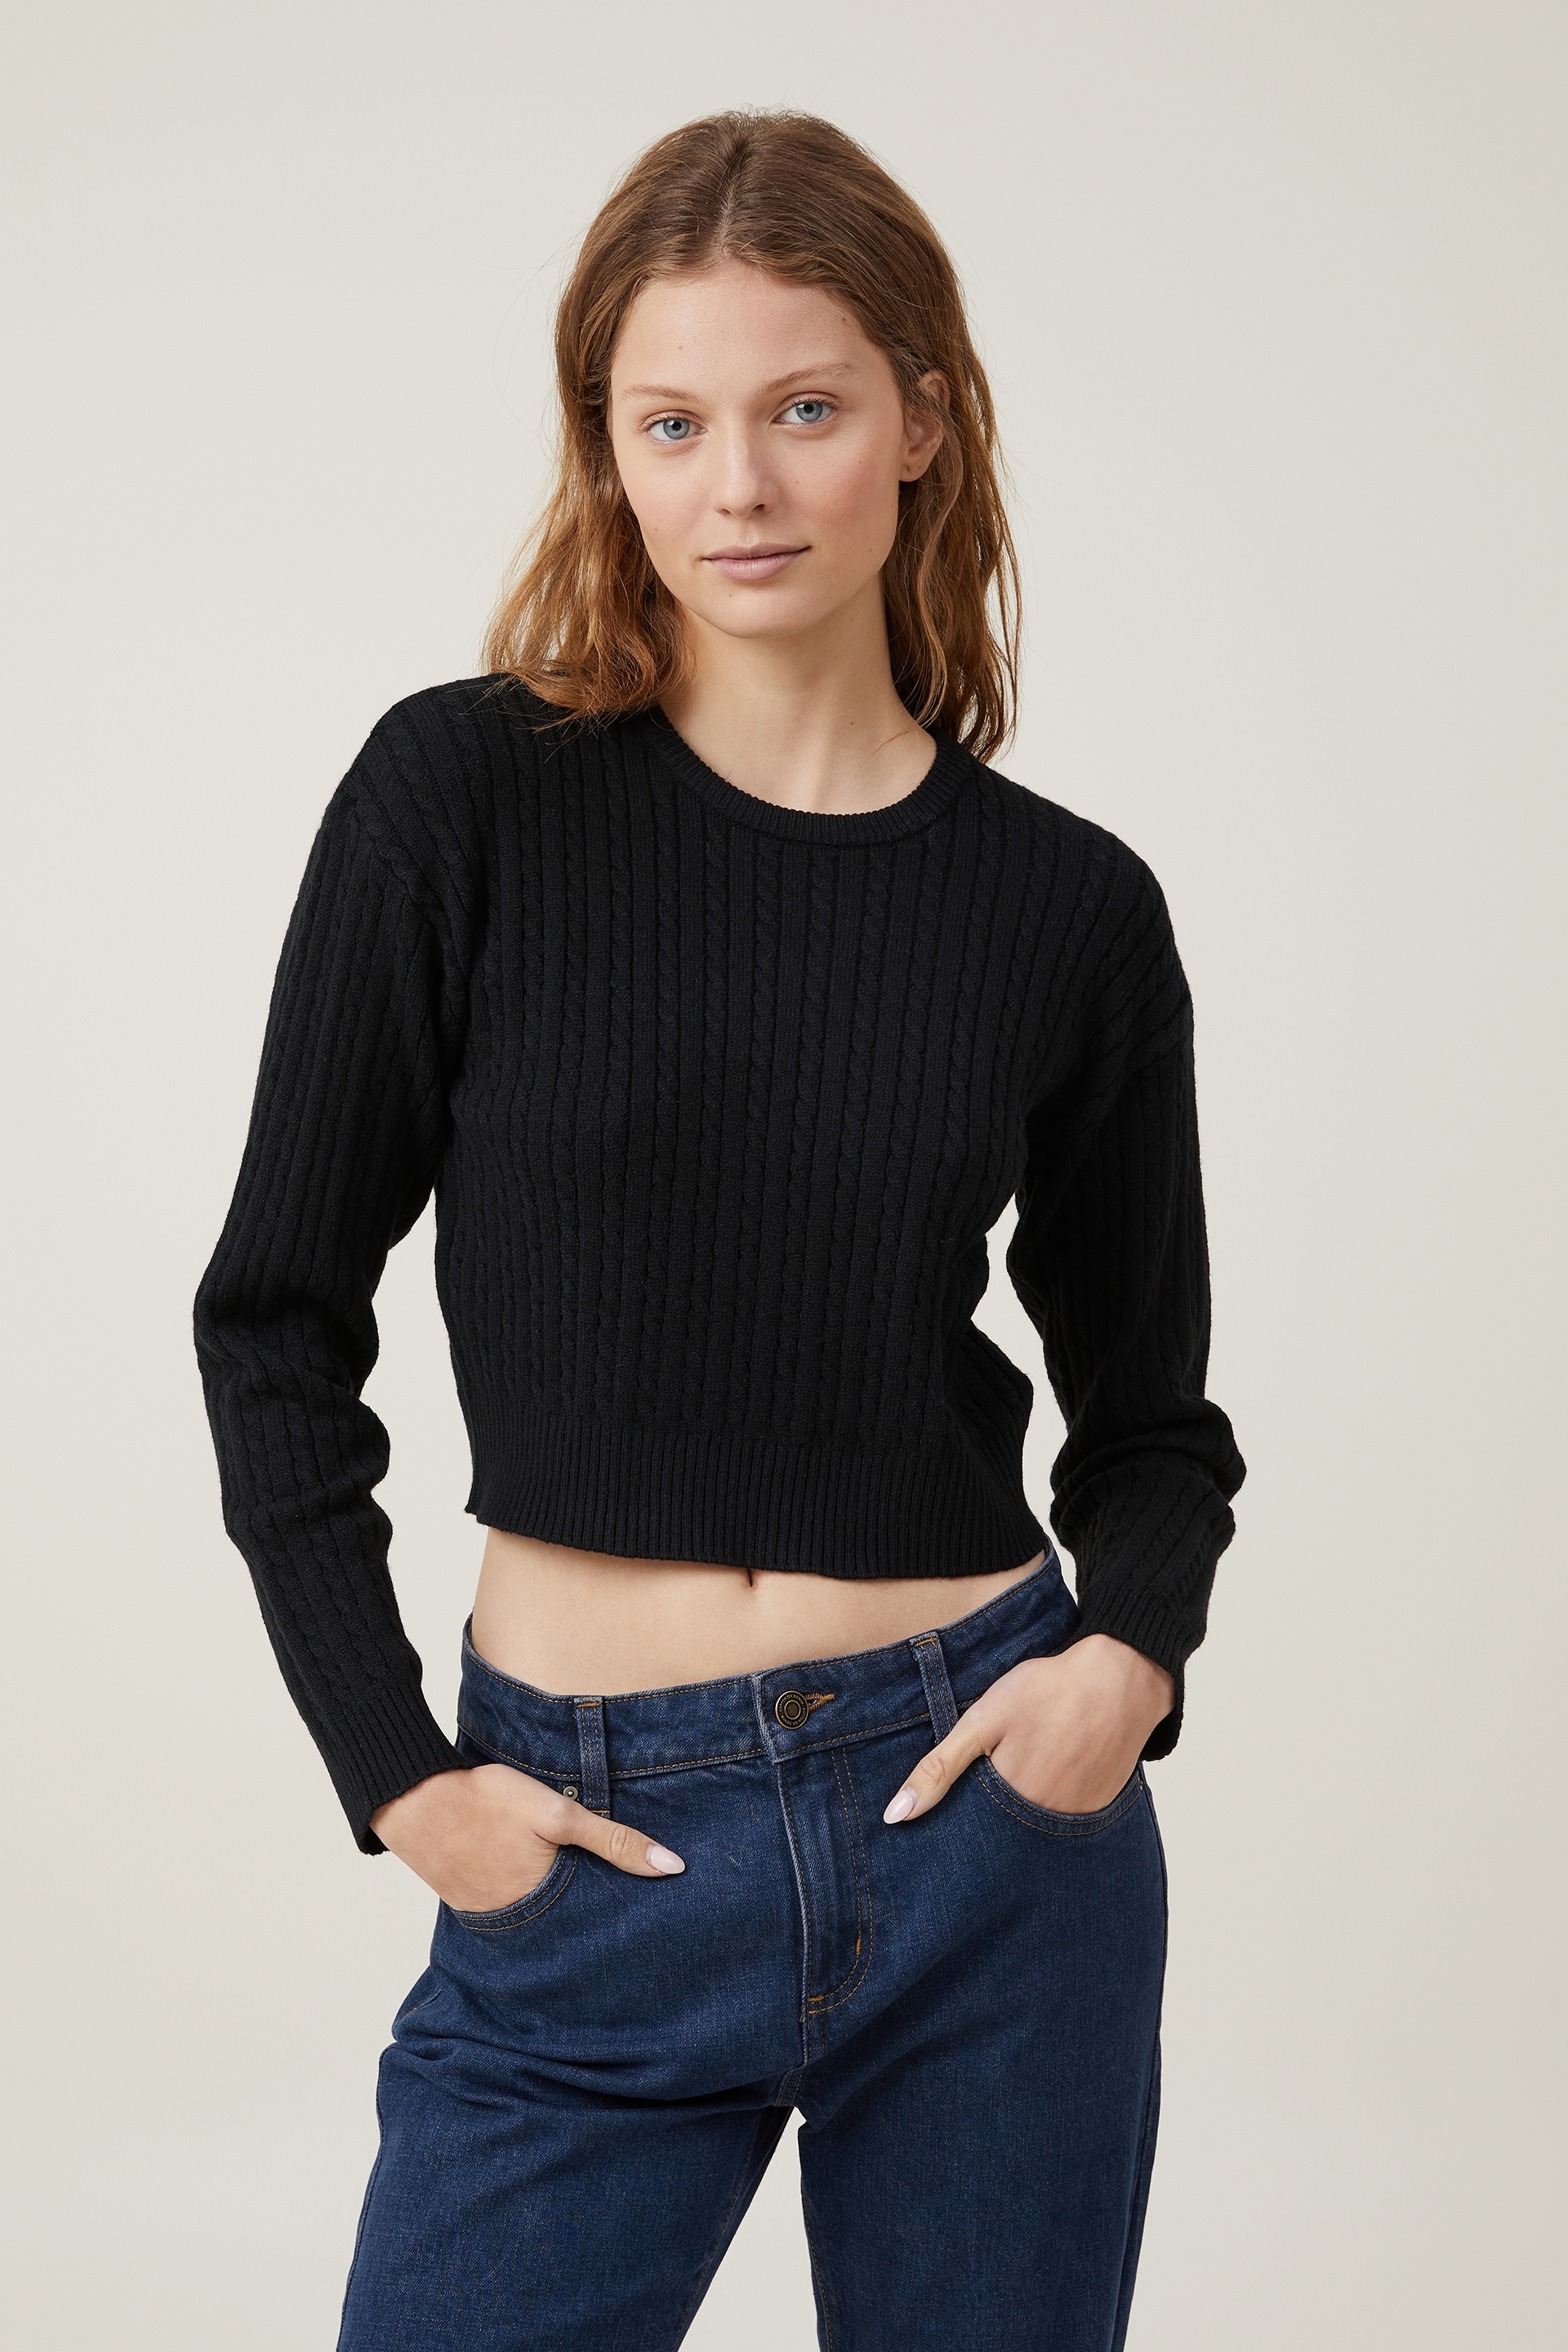 Cotton On Women - Everfine Cable Crew Neck Pullover - Black